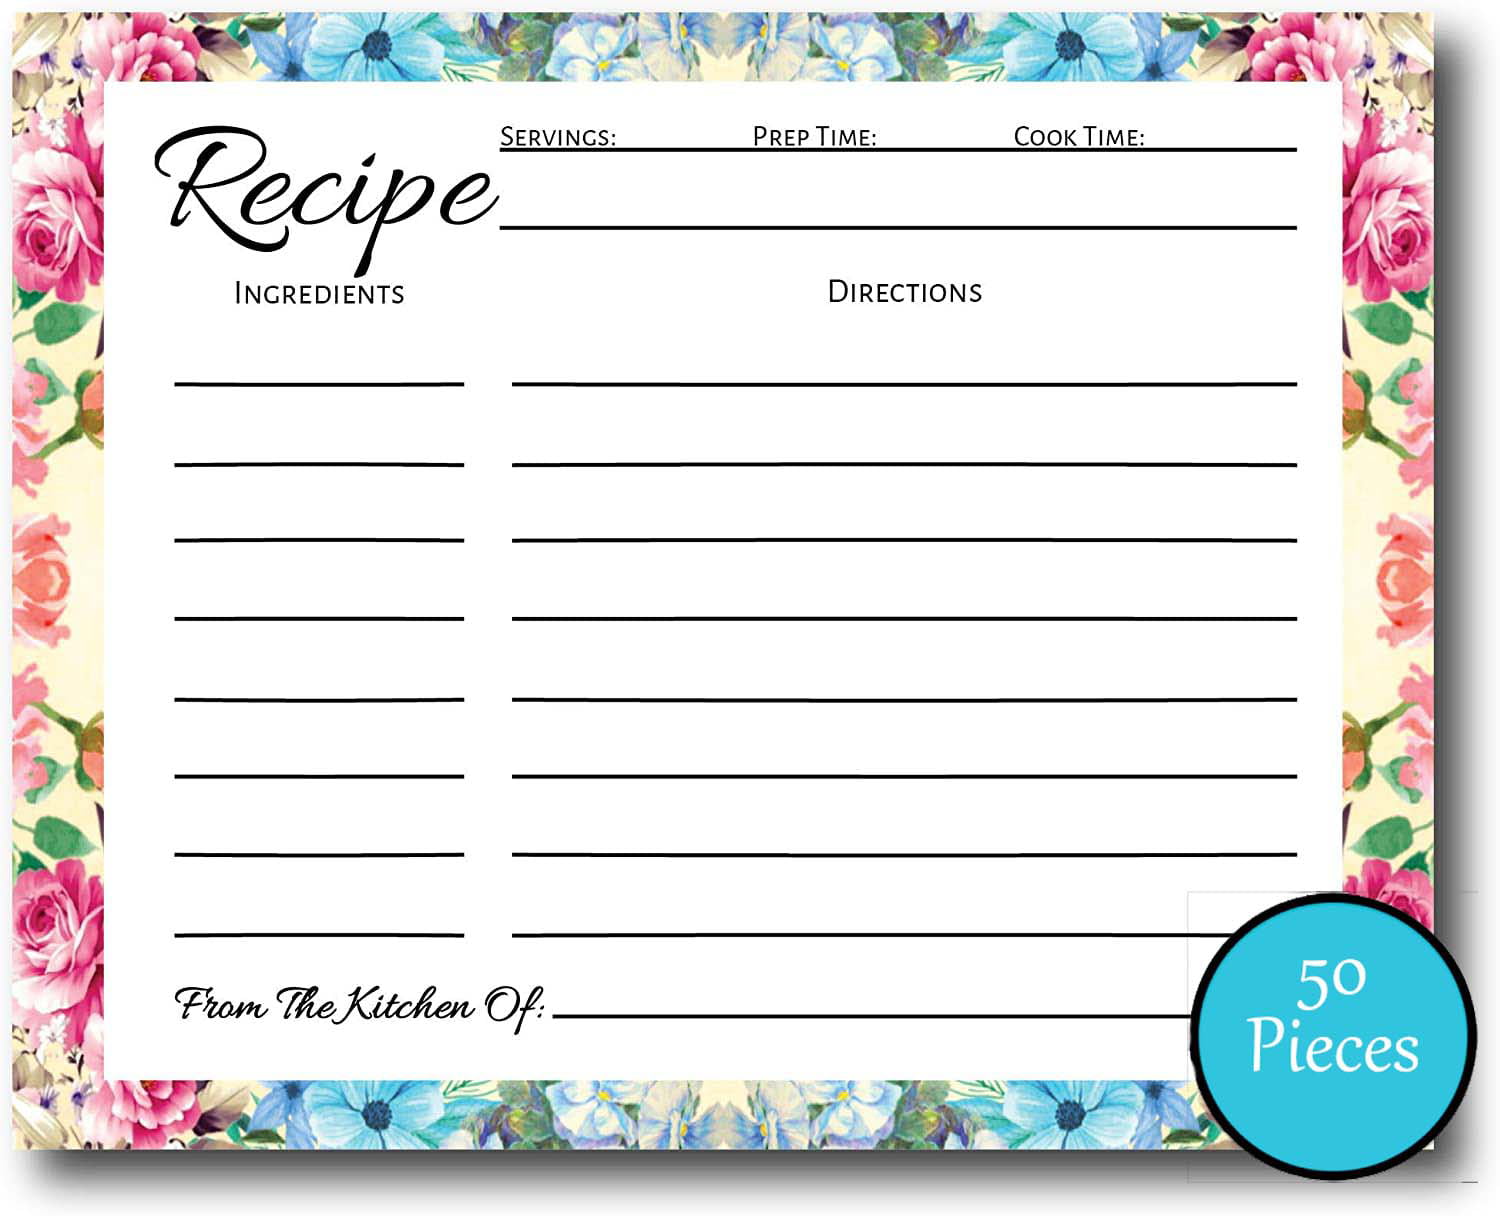 pioneer-woman-style-floral-recipe-cards-5x7-50-pcs-flower-recipe